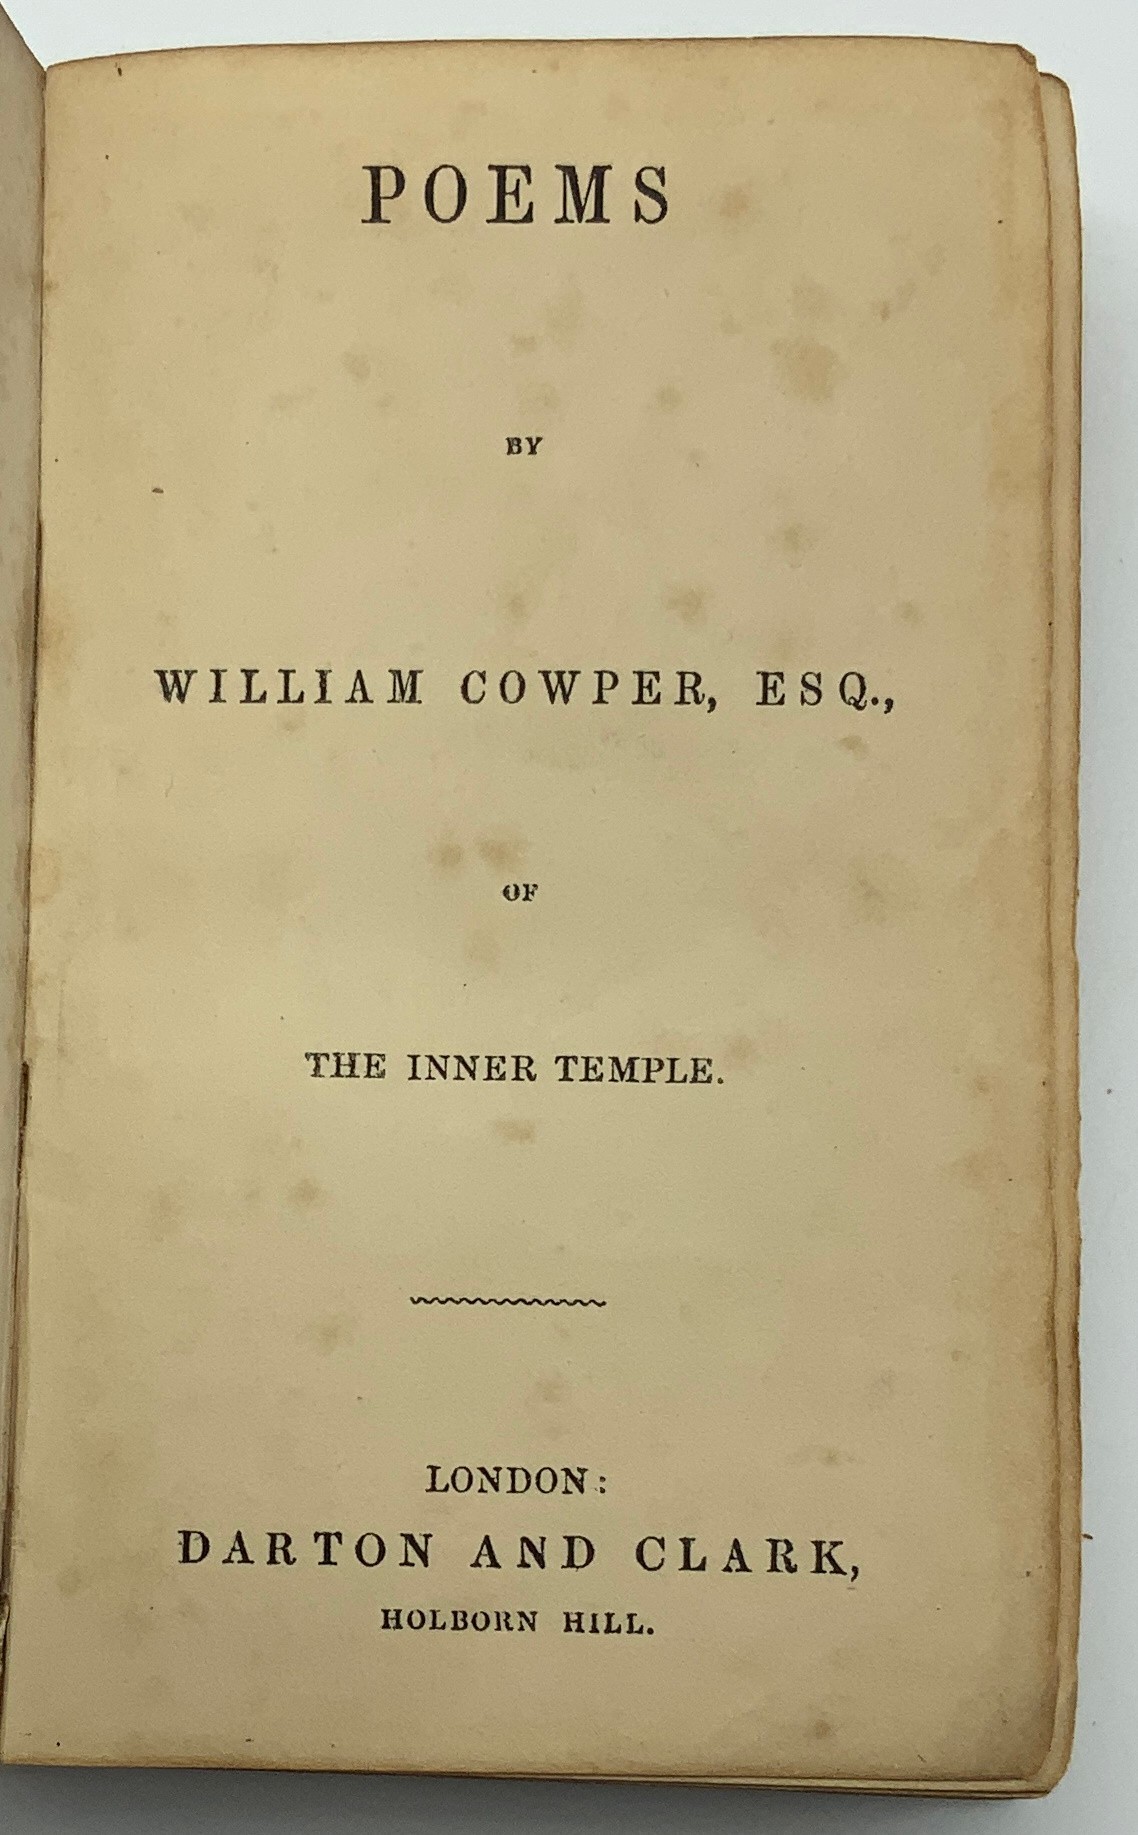 COWPER'S POEMS PUBLISHED BY DARTON & CLARK LONDON - Image 4 of 5